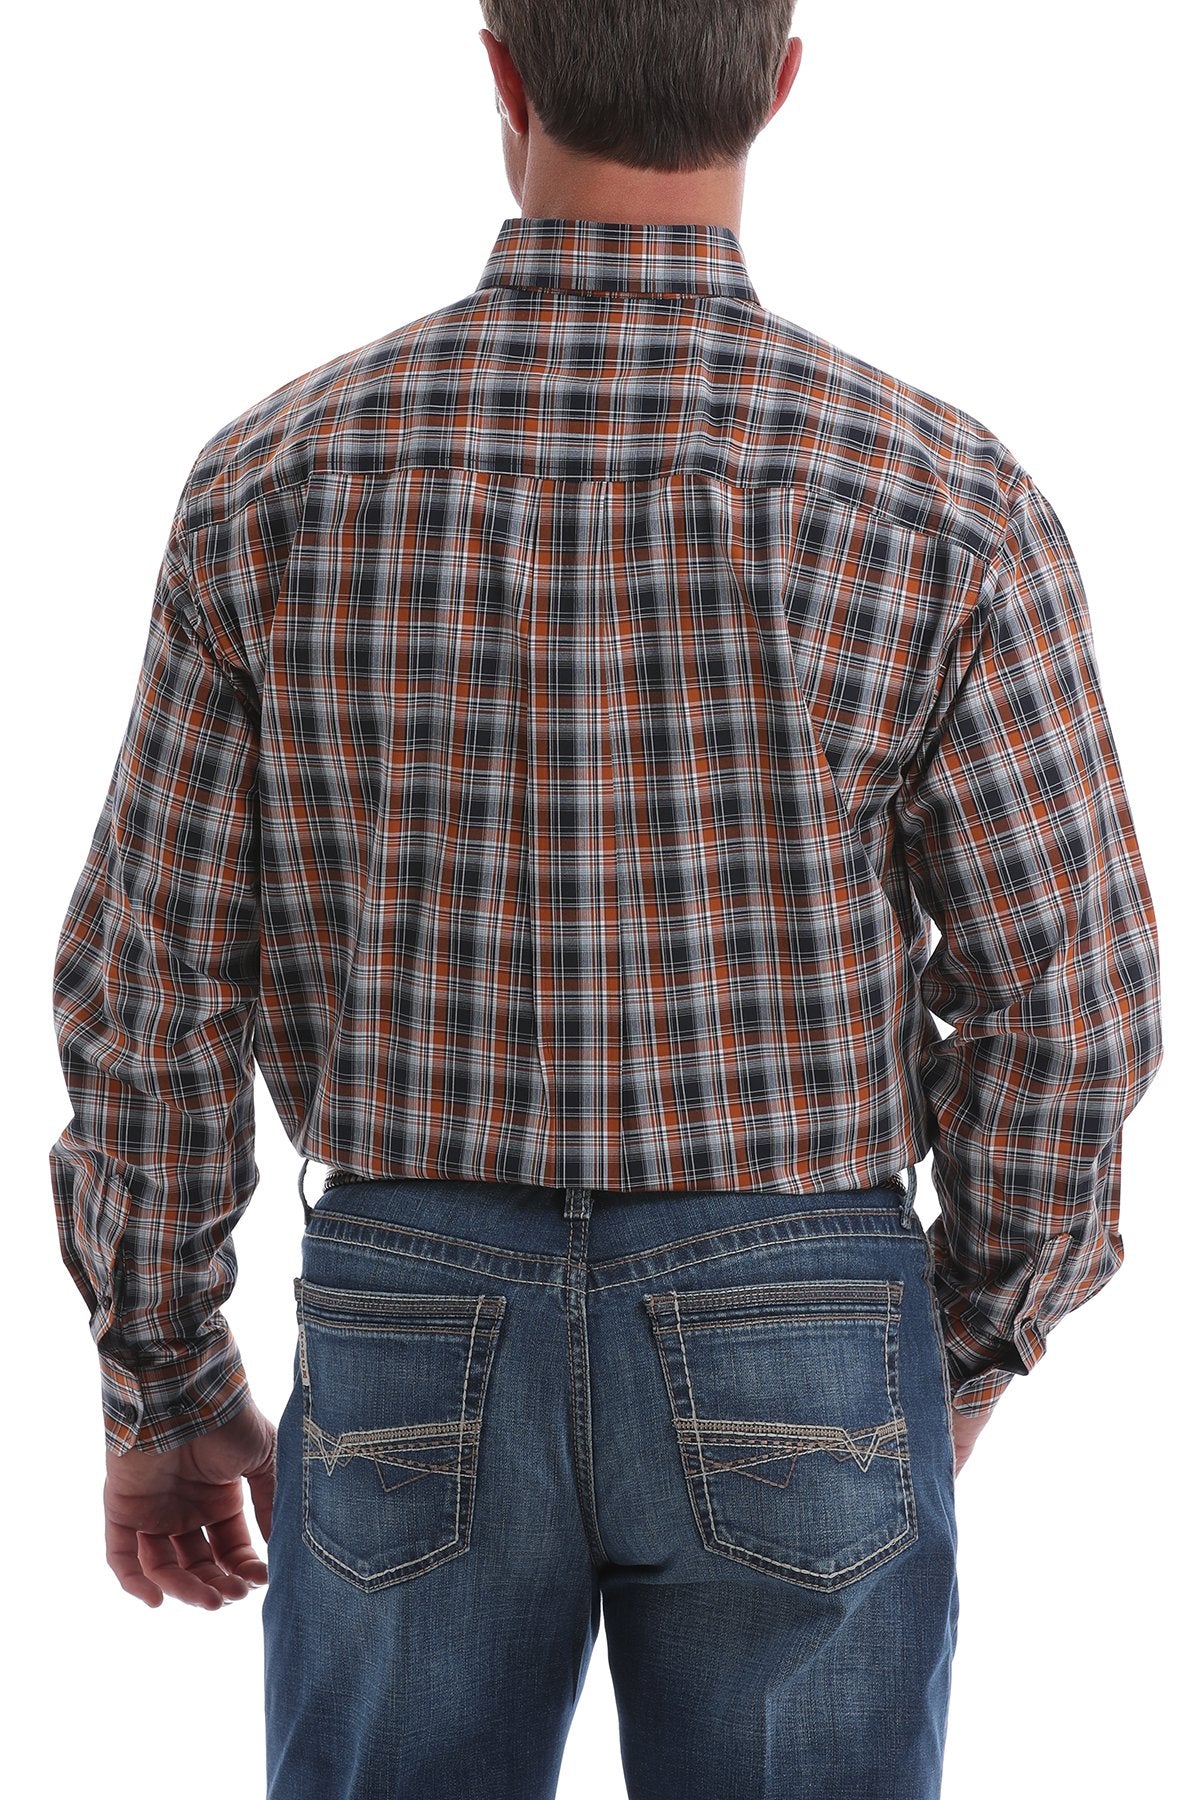 Cinch Navy, Brown and White Plaid L/S Shirt